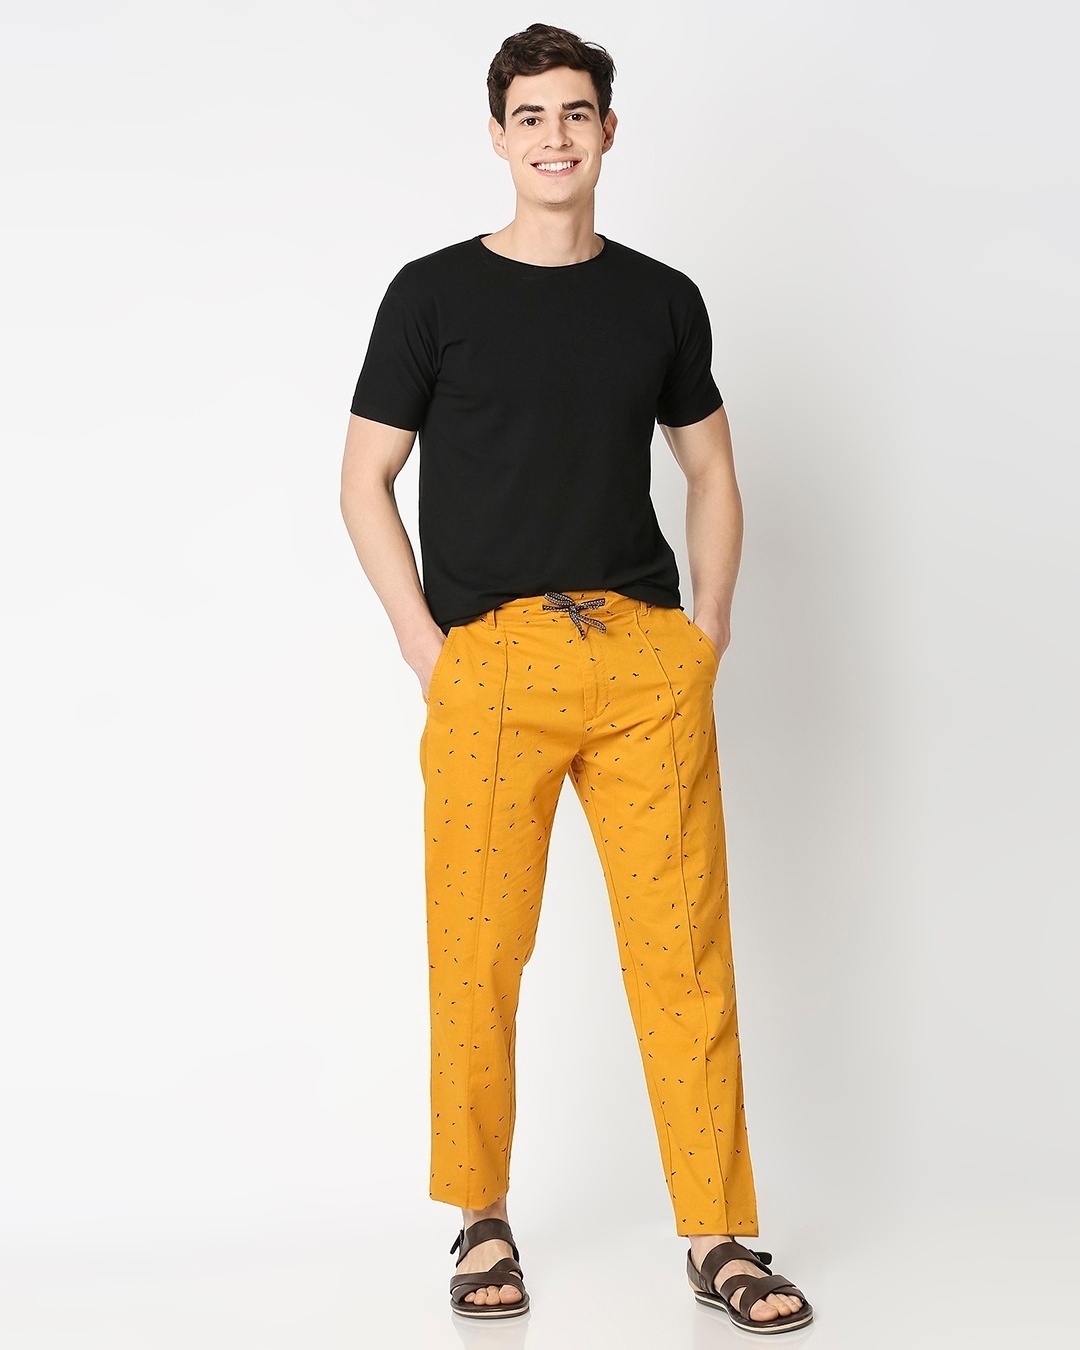 Shop Men's All Over Printed Indo Fusion Pants